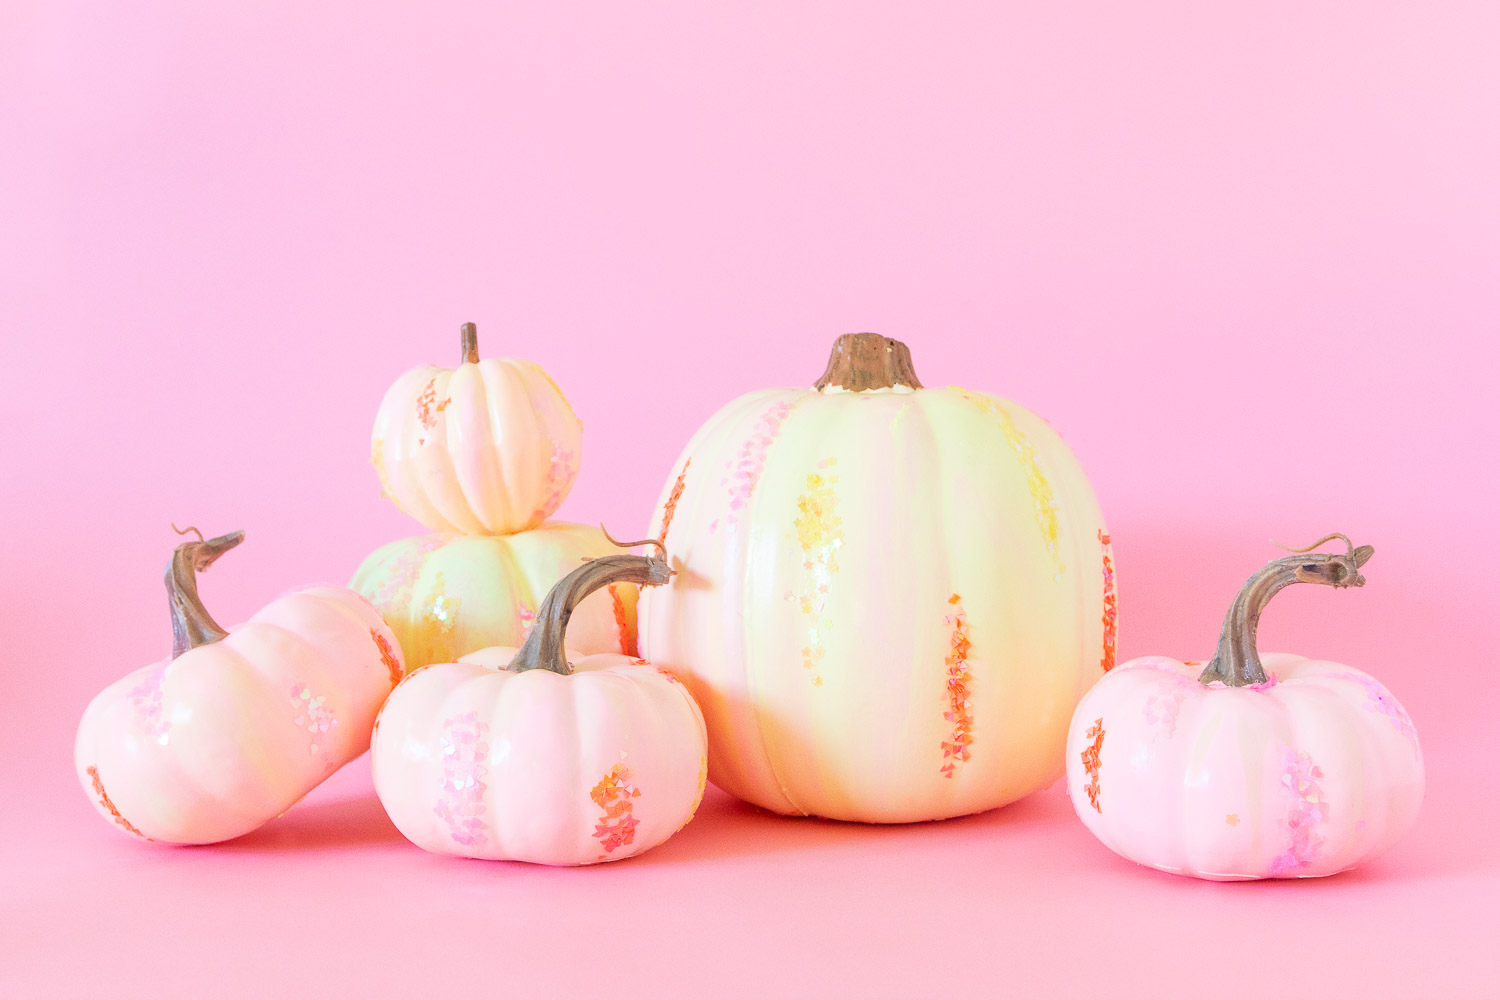 A variety of neon paint poured pumpkins with light pink, orange and yellow marbled effect. There is also pink, orange and yellow glitter attached to each pumpkin. They're displayed in a group on a pink backdrop.